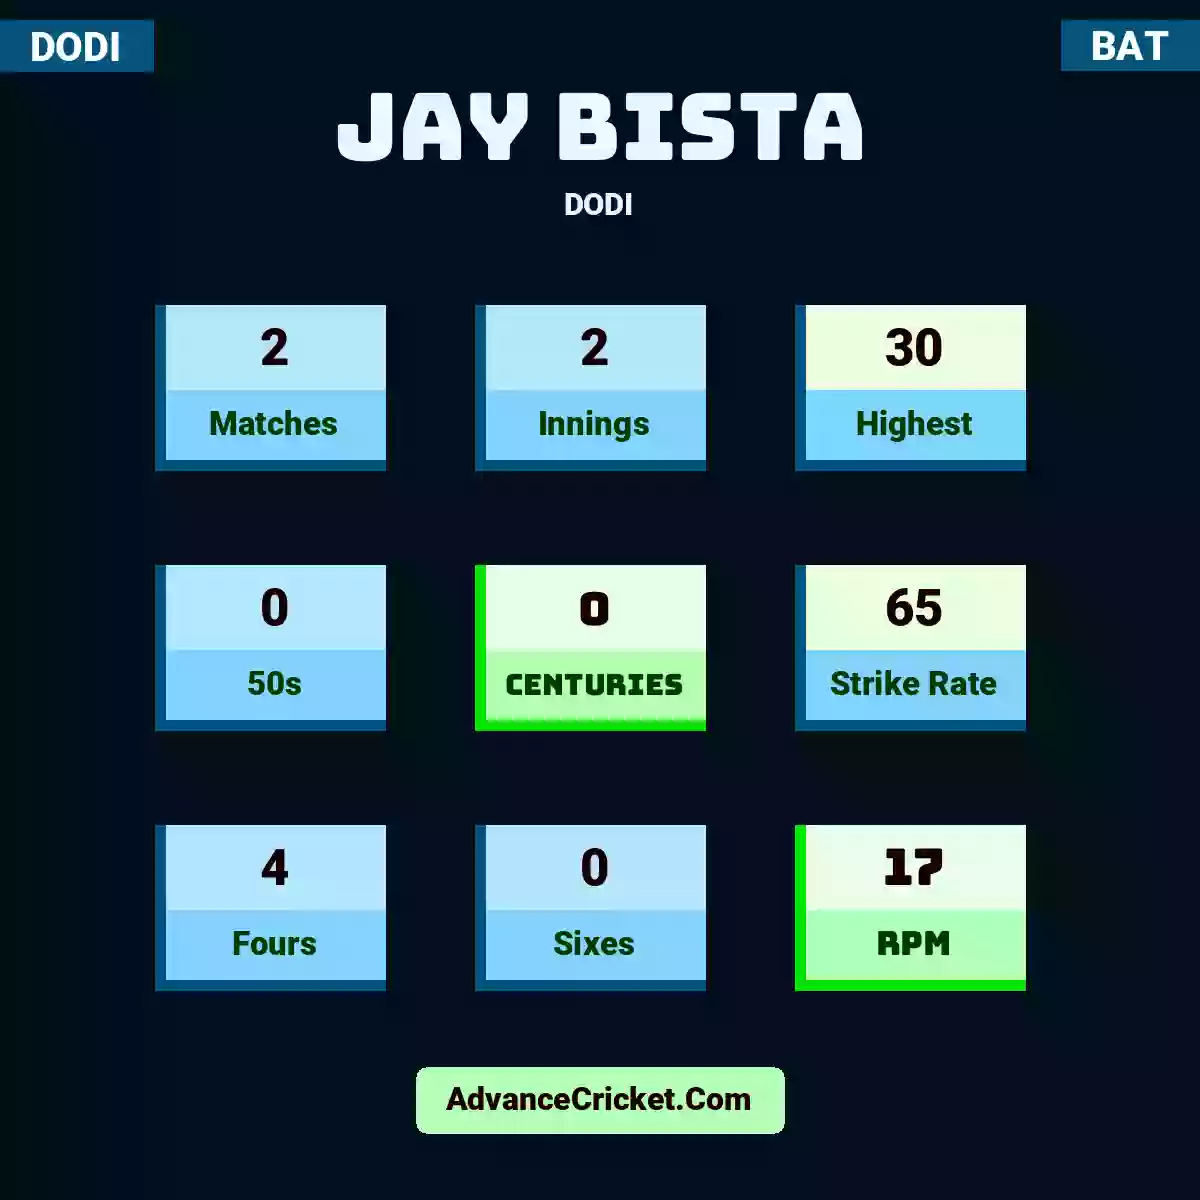 Jay Bista DODI , Jay Bista played 2 matches, scored 30 runs as highest, 0 half-centuries, and 0 centuries, with a strike rate of 65. J.Bista hit 4 fours and 0 sixes, with an RPM of 17.